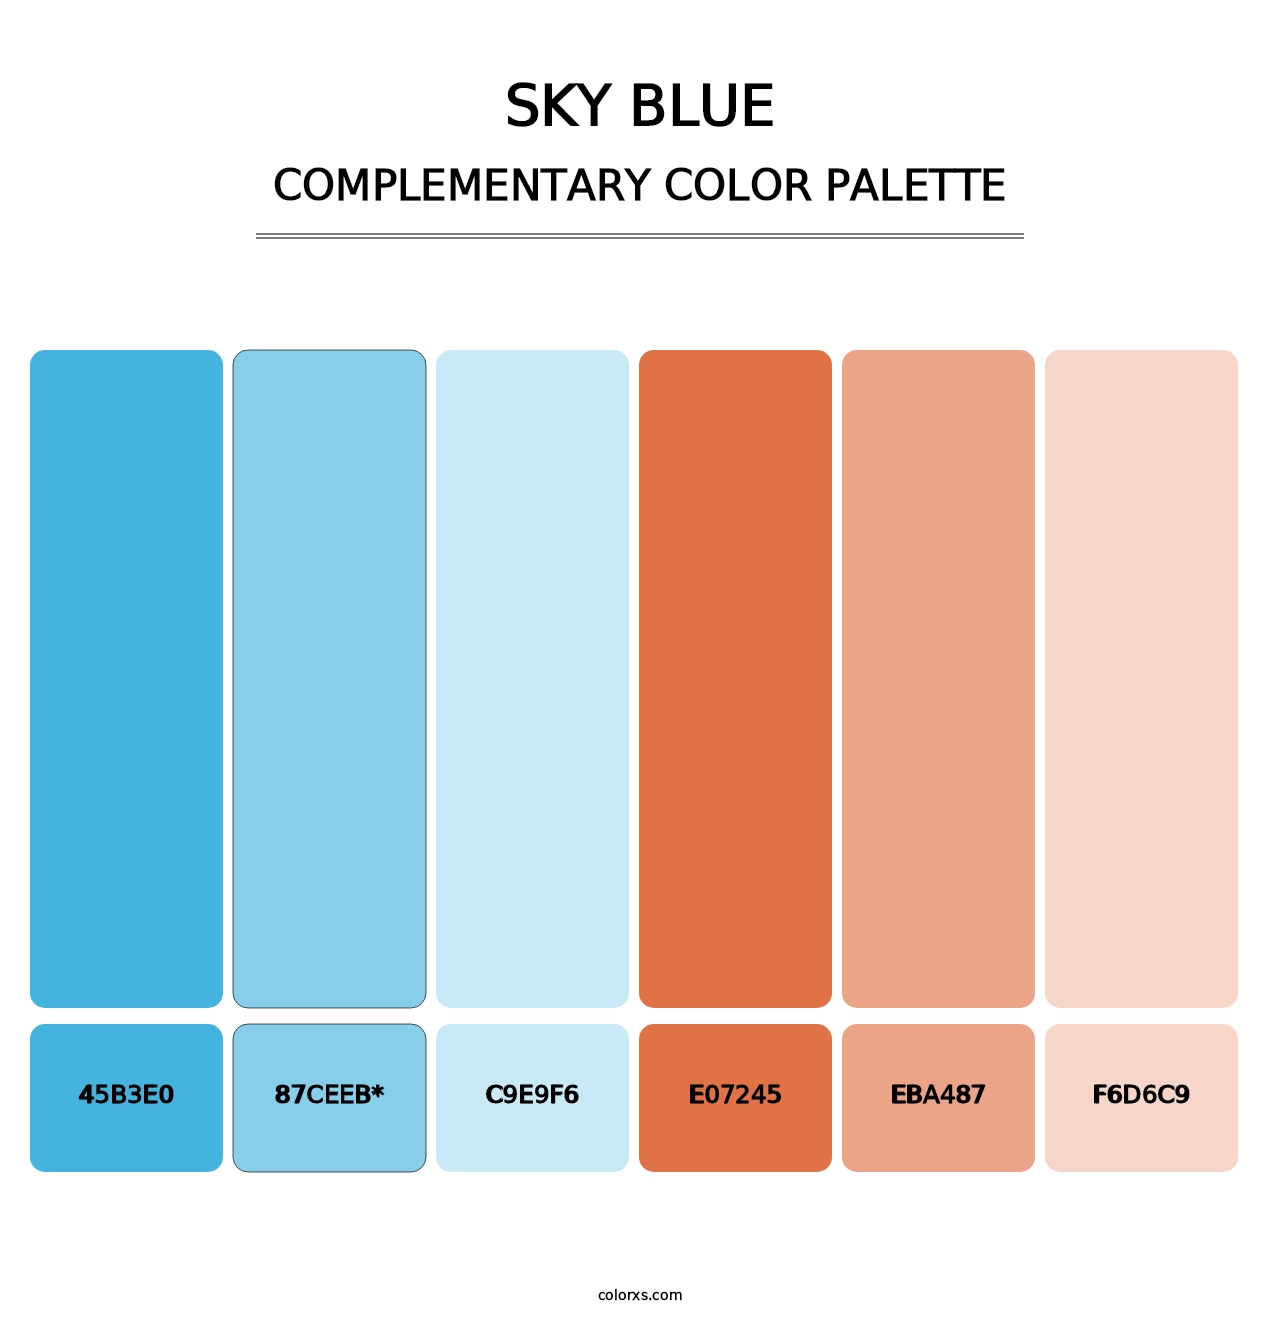 Sky blue - Complementary Color Palette